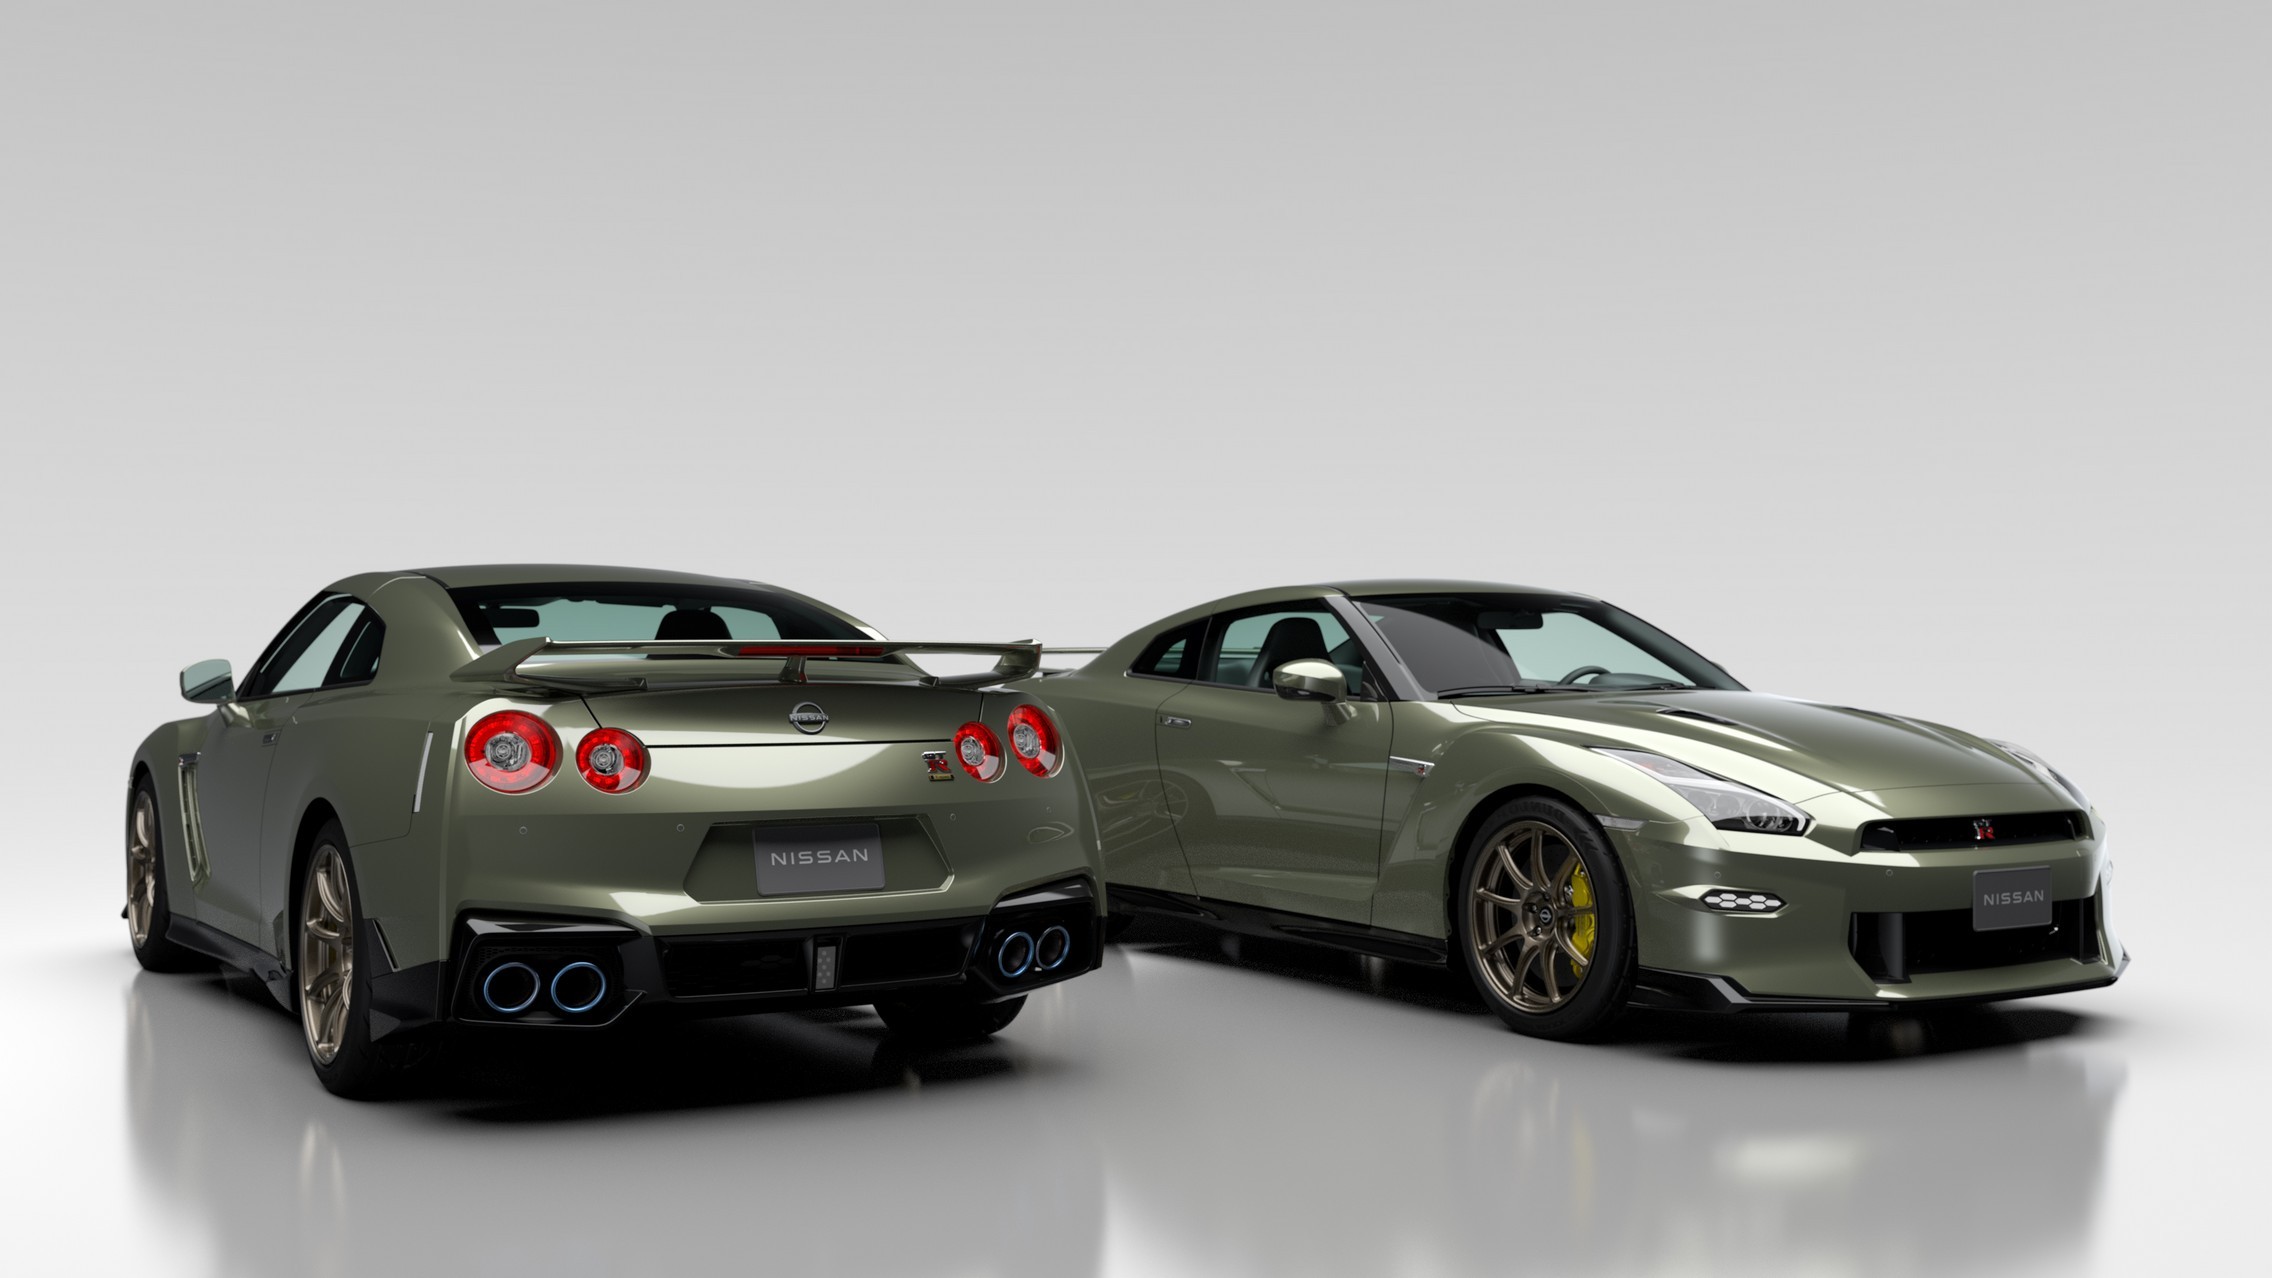 Pack of Digital R36 Nissan GT-R Supercars Dwell Around Flaunting Ritzy  Shades - autoevolution